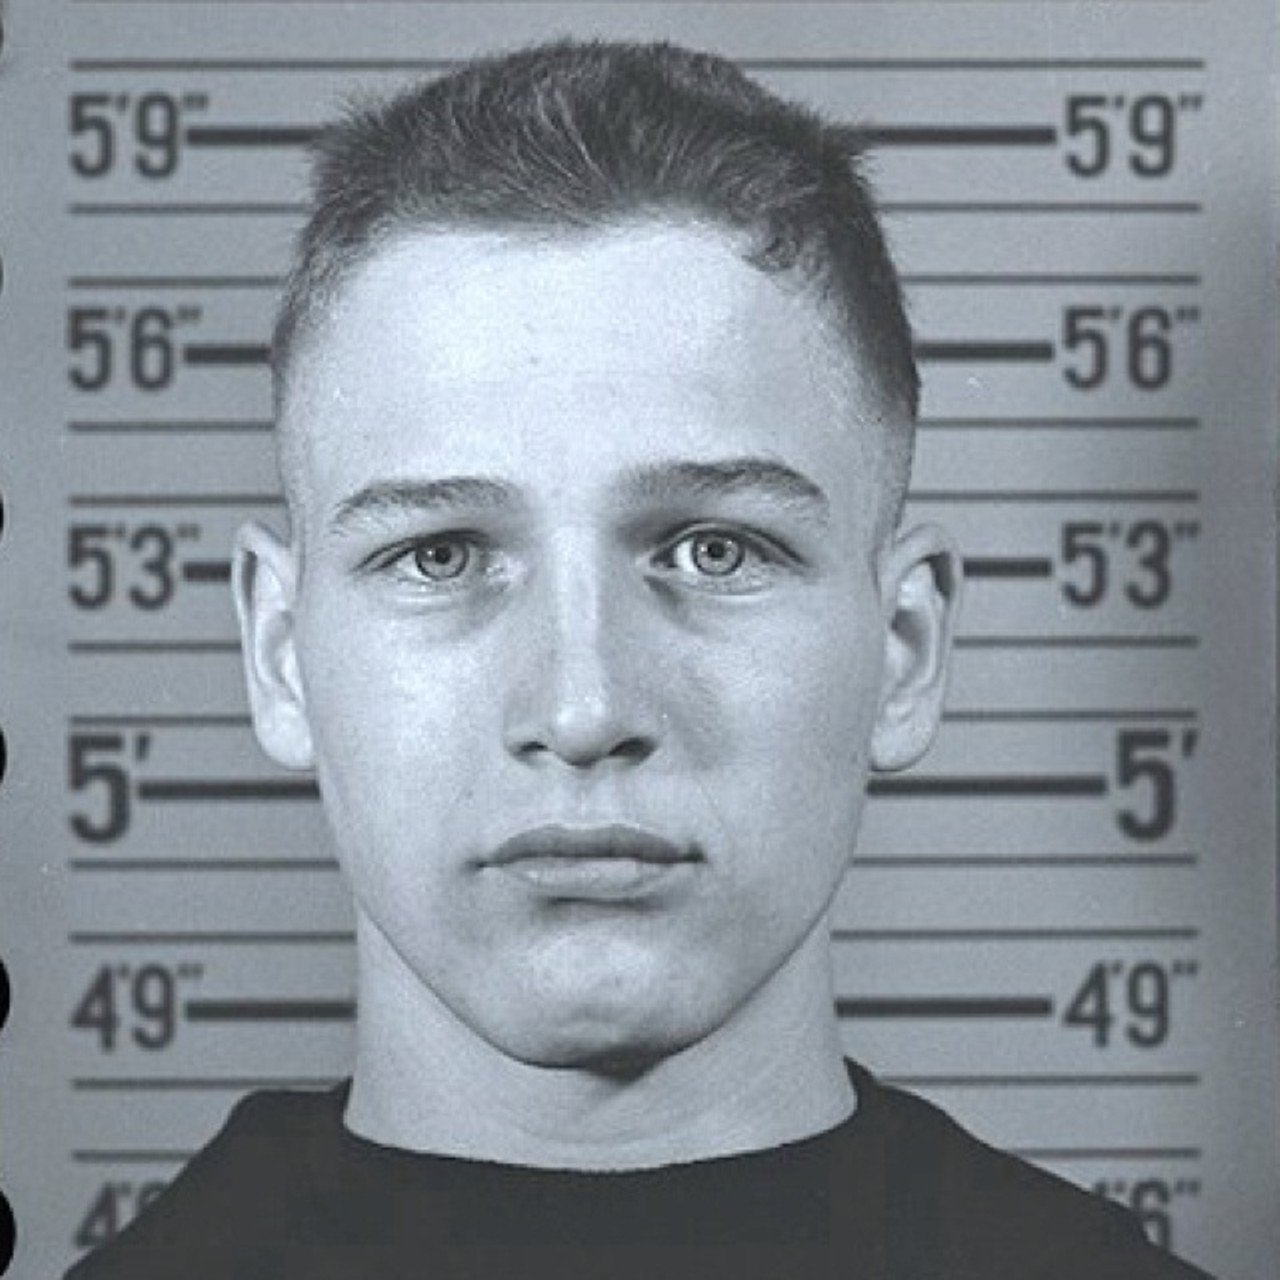 Paul Newman was born in Shaker Heights, Ohio, and went on to become an actor, director, entrepreneur, race driver, environmentalist, activist and philanthropist. Newman was arrested for causing trouble after a night of drinking on Kenyon College campus in 1946 at age 21 (shown here), and again, 10 years later on a DUI charge.